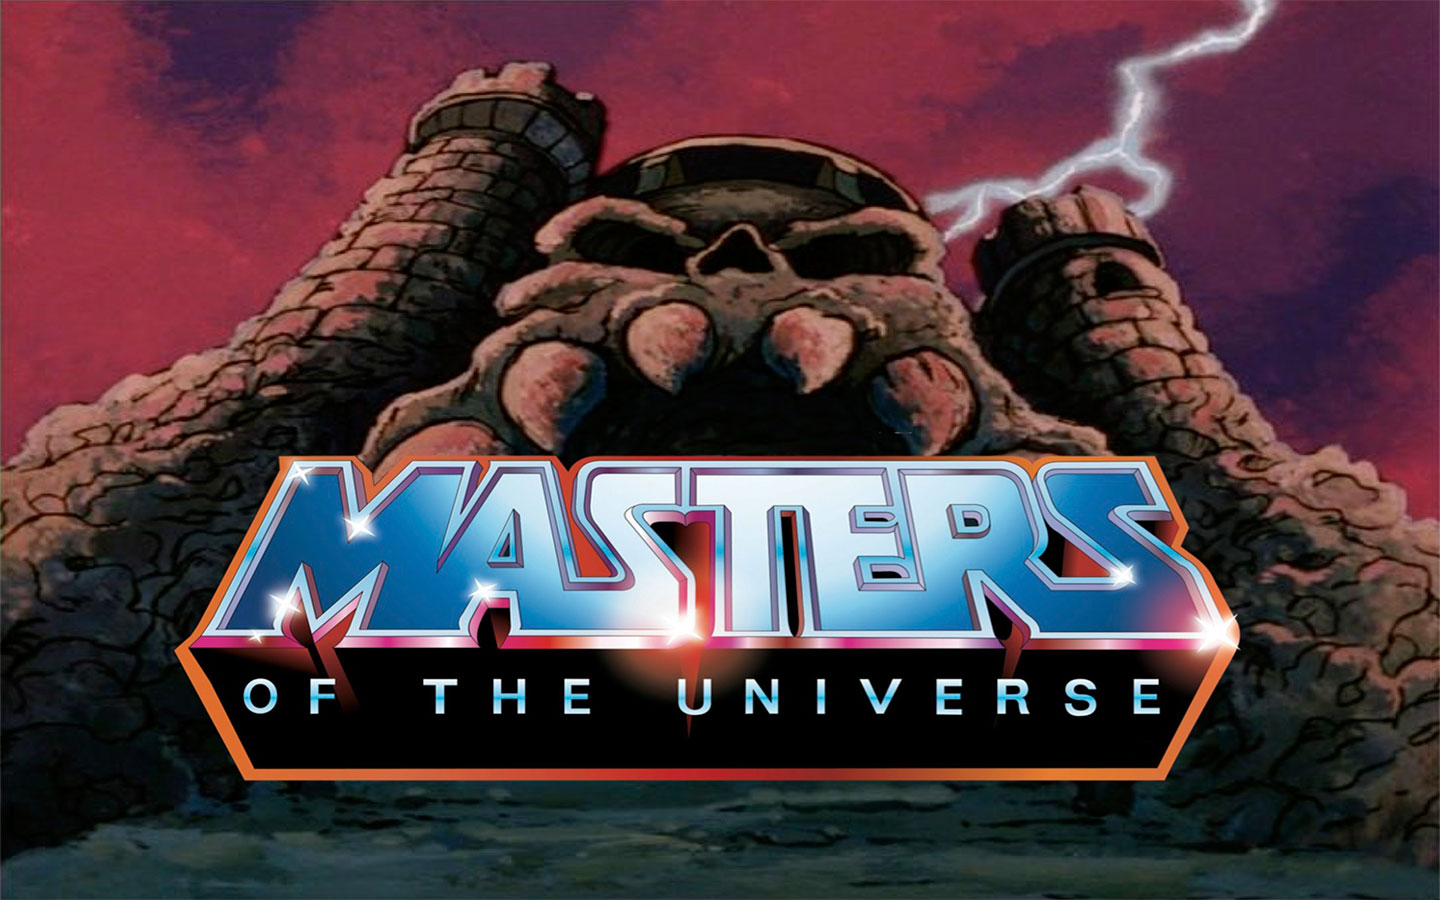 He Man And The Masters Of Universe Image Id